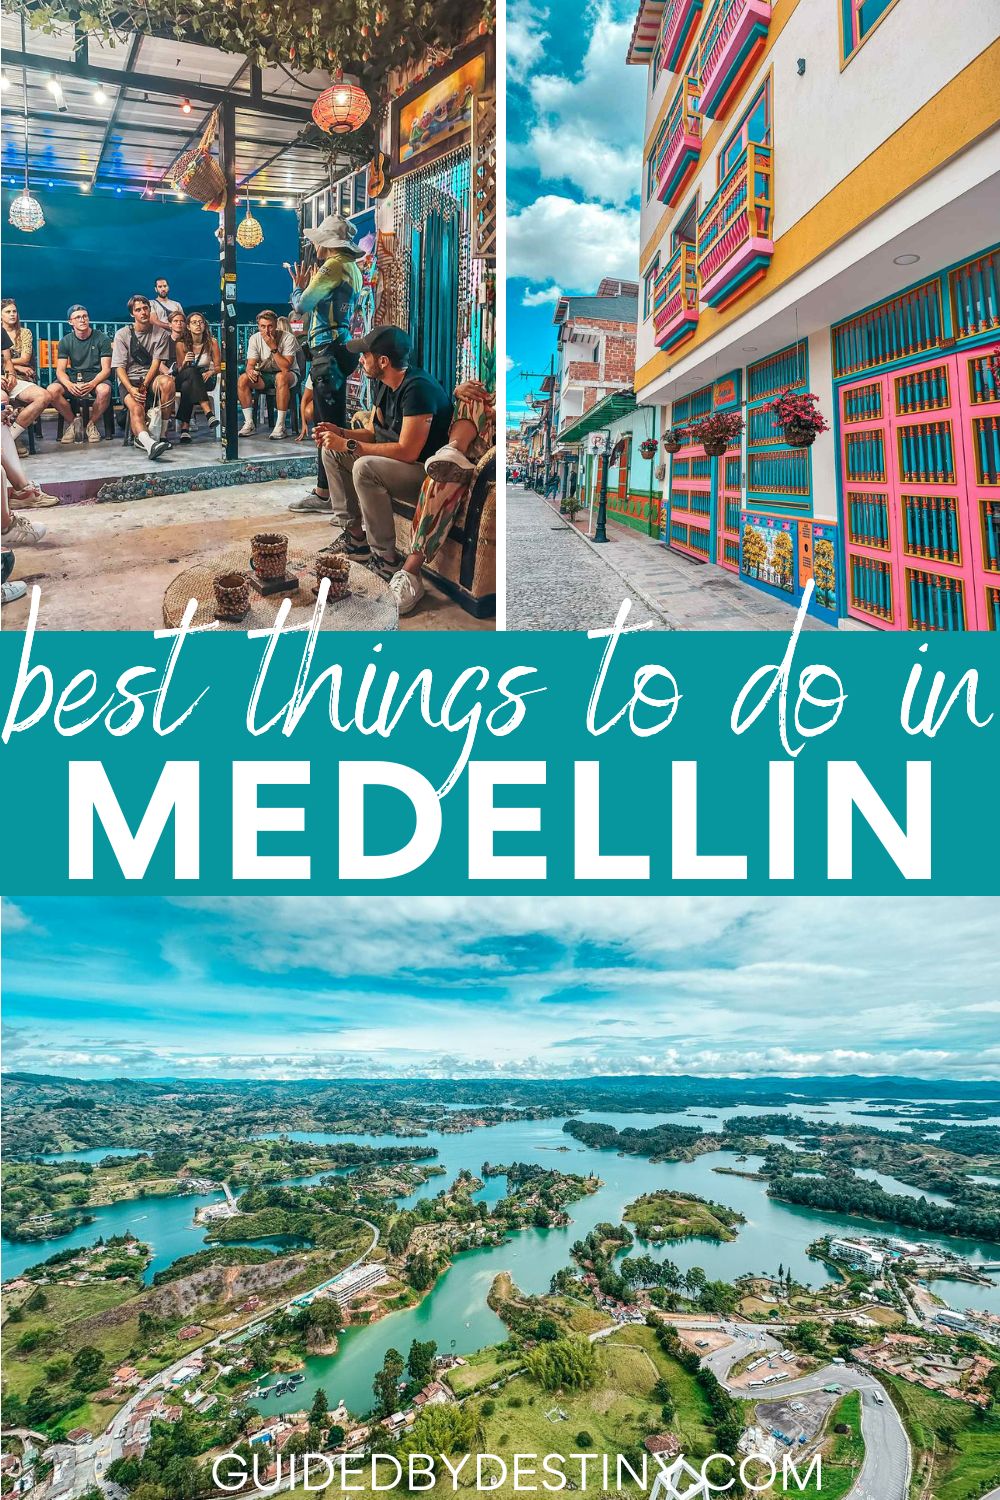 best things to do in medellin